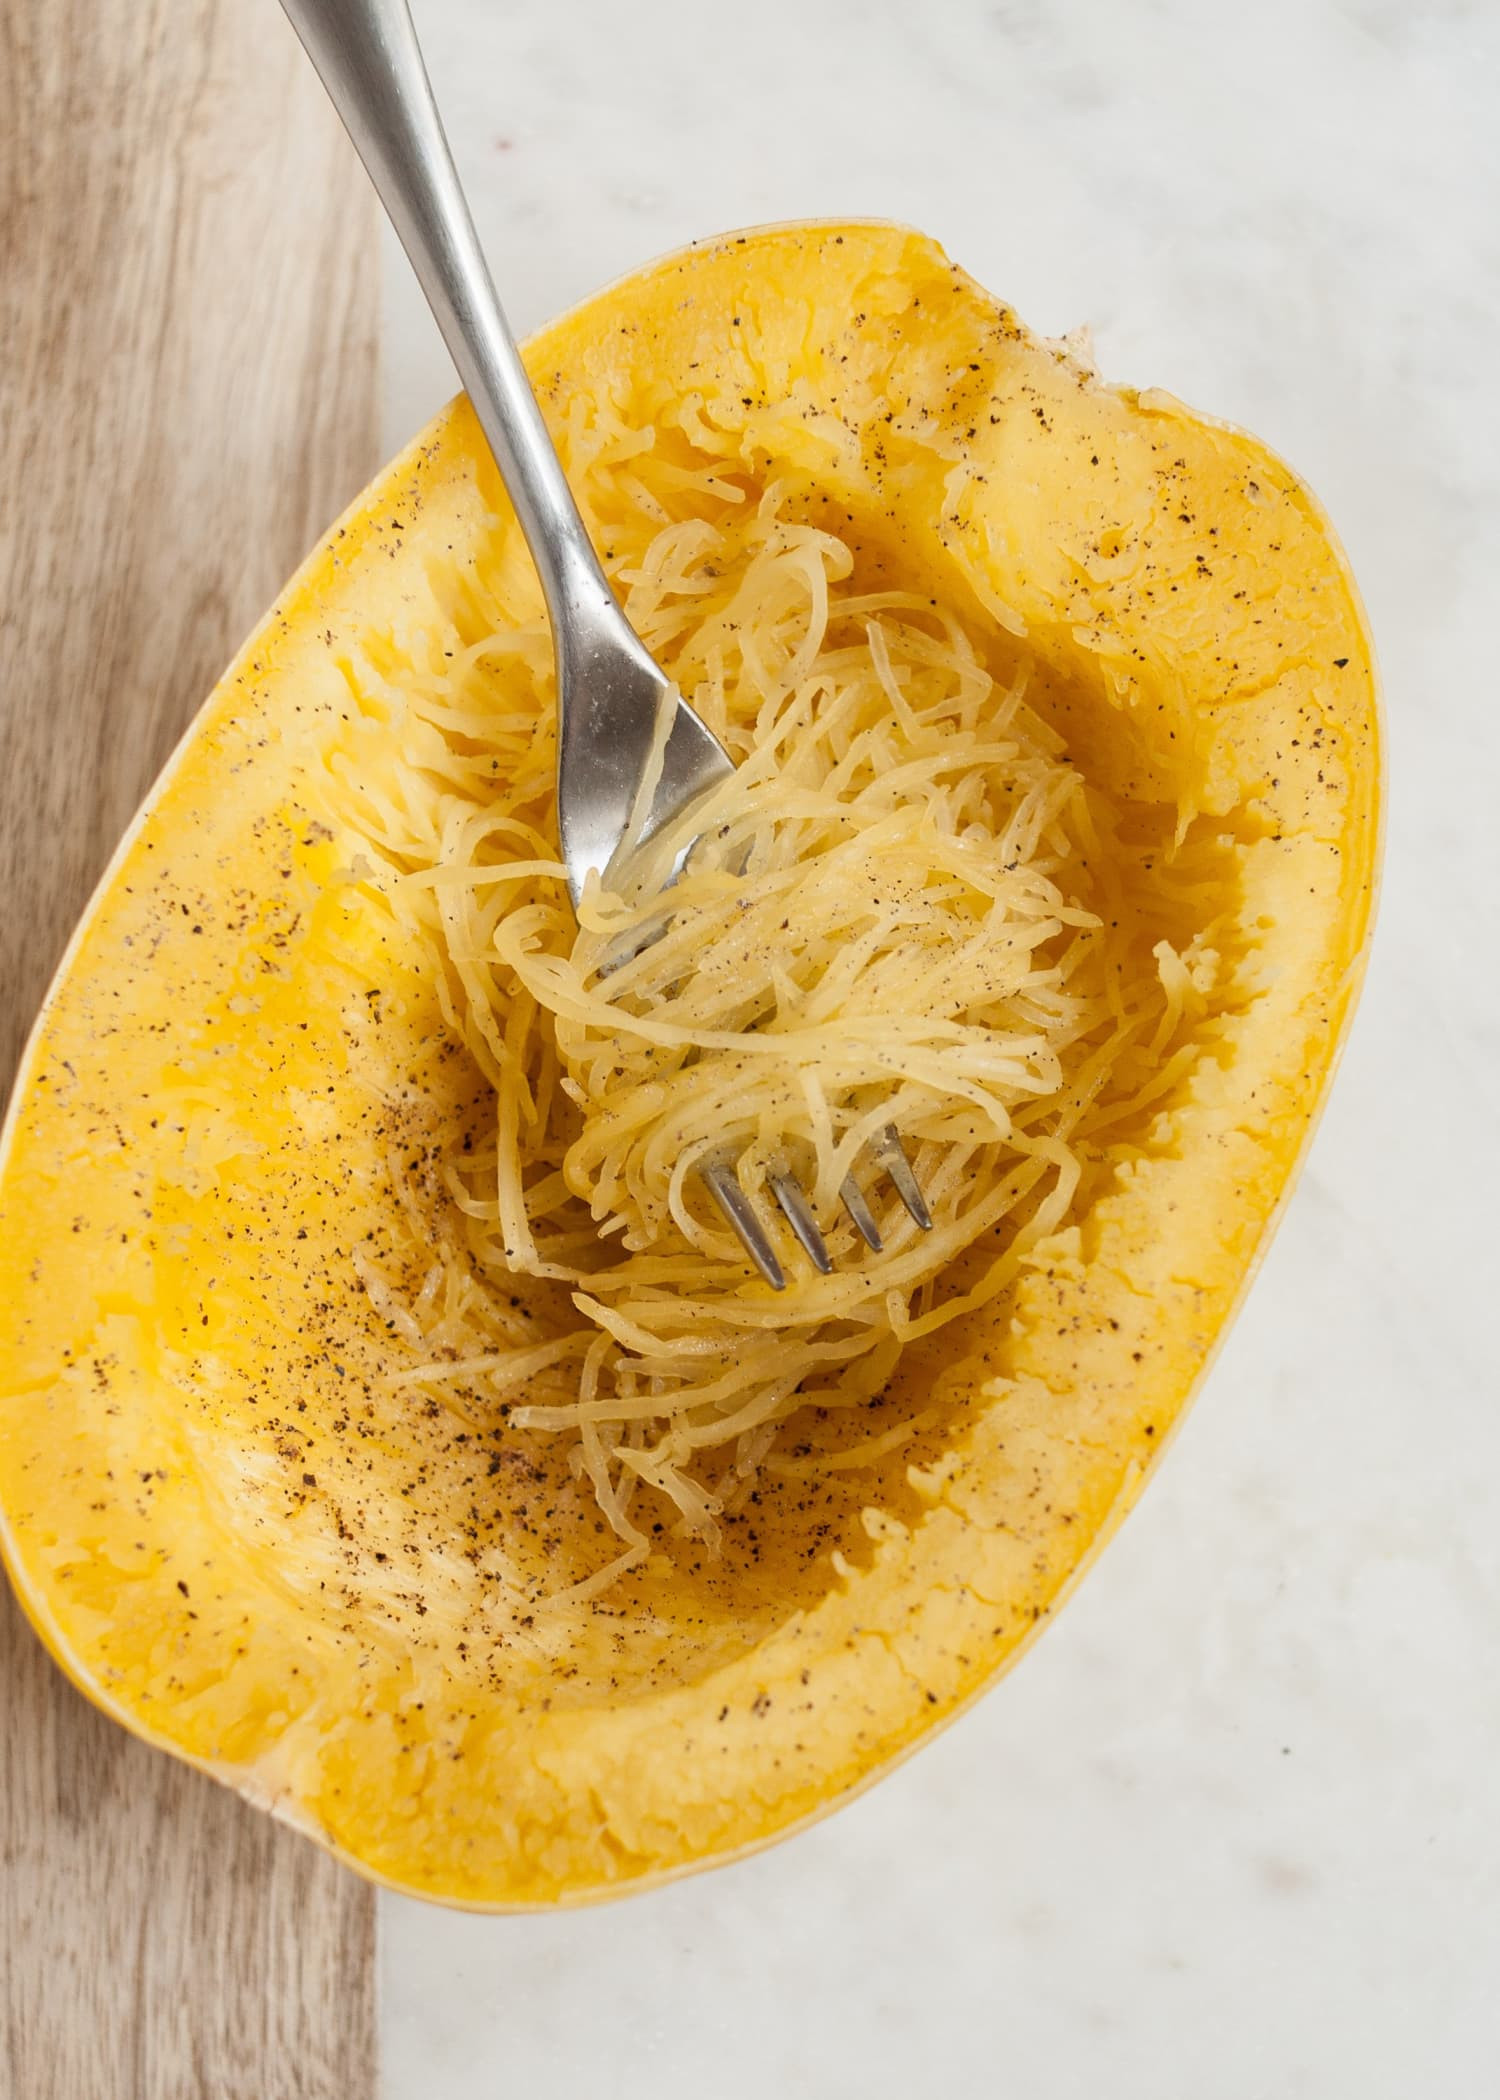 Spaghetti Squash Microwave Whole
 How To Cook Spaghetti Squash in the Microwave